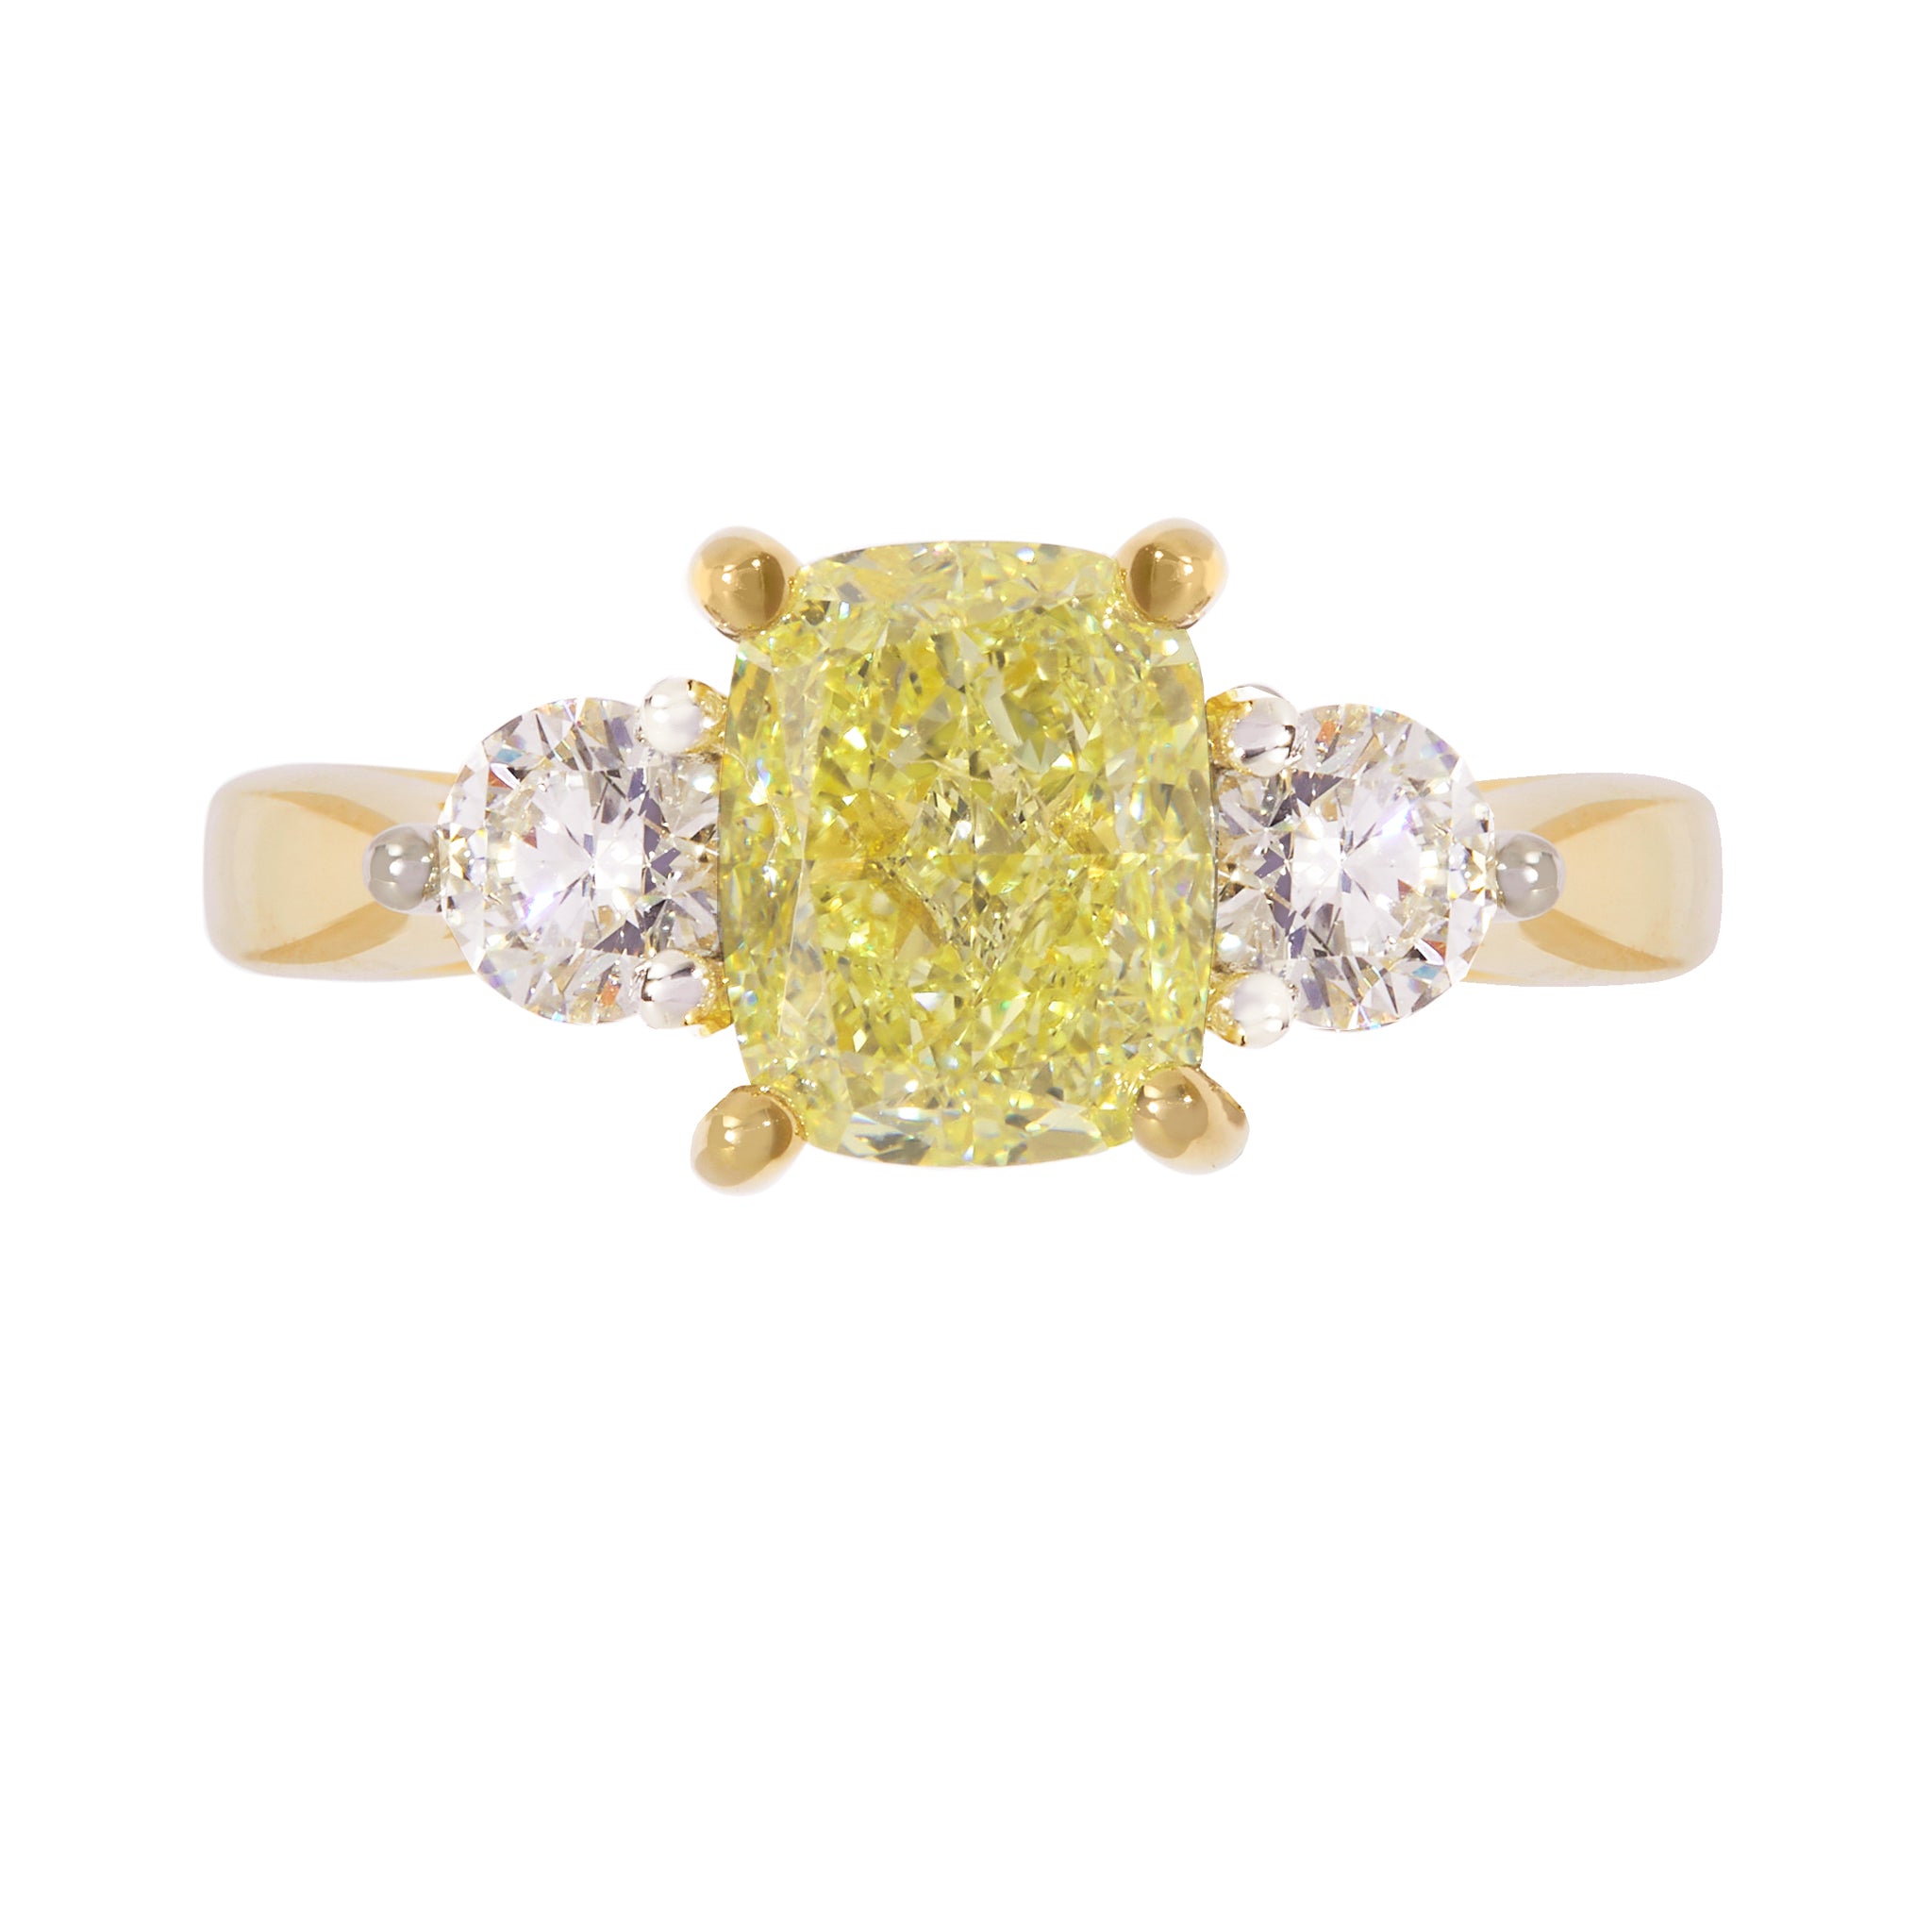 How to choose the perfect Yellow Diamond for the Engagement Ring of her dreams…